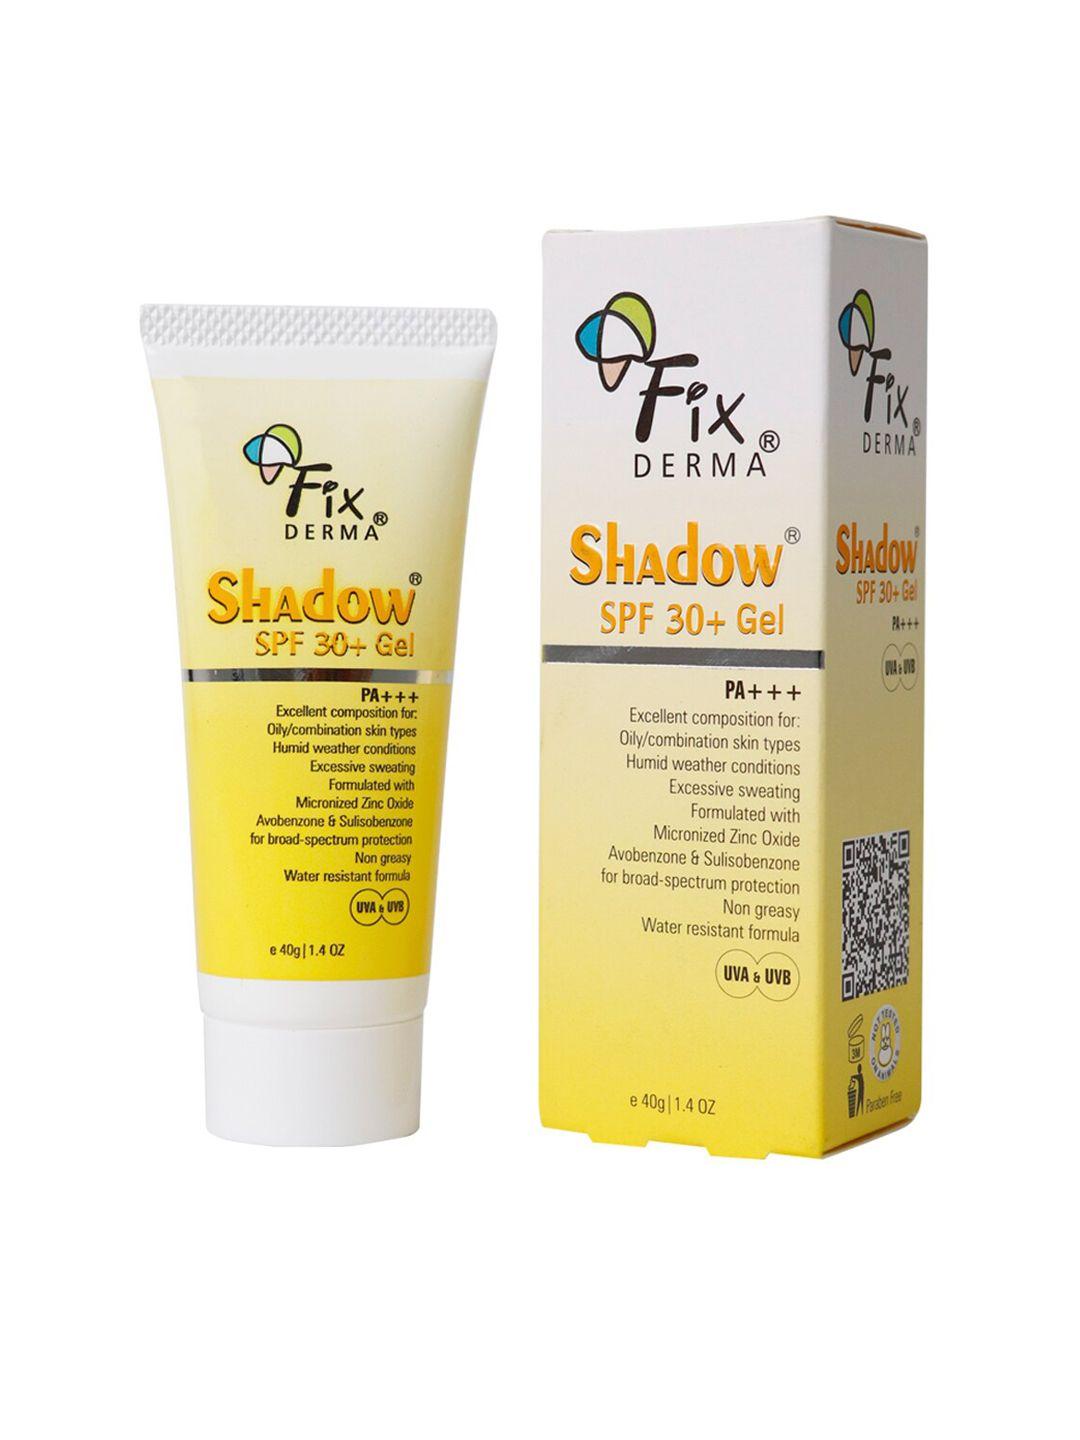 fixderma-shadow-sunscreen-spf-30+-gel-for-oily-skin-with-pa+++-protection---40-g